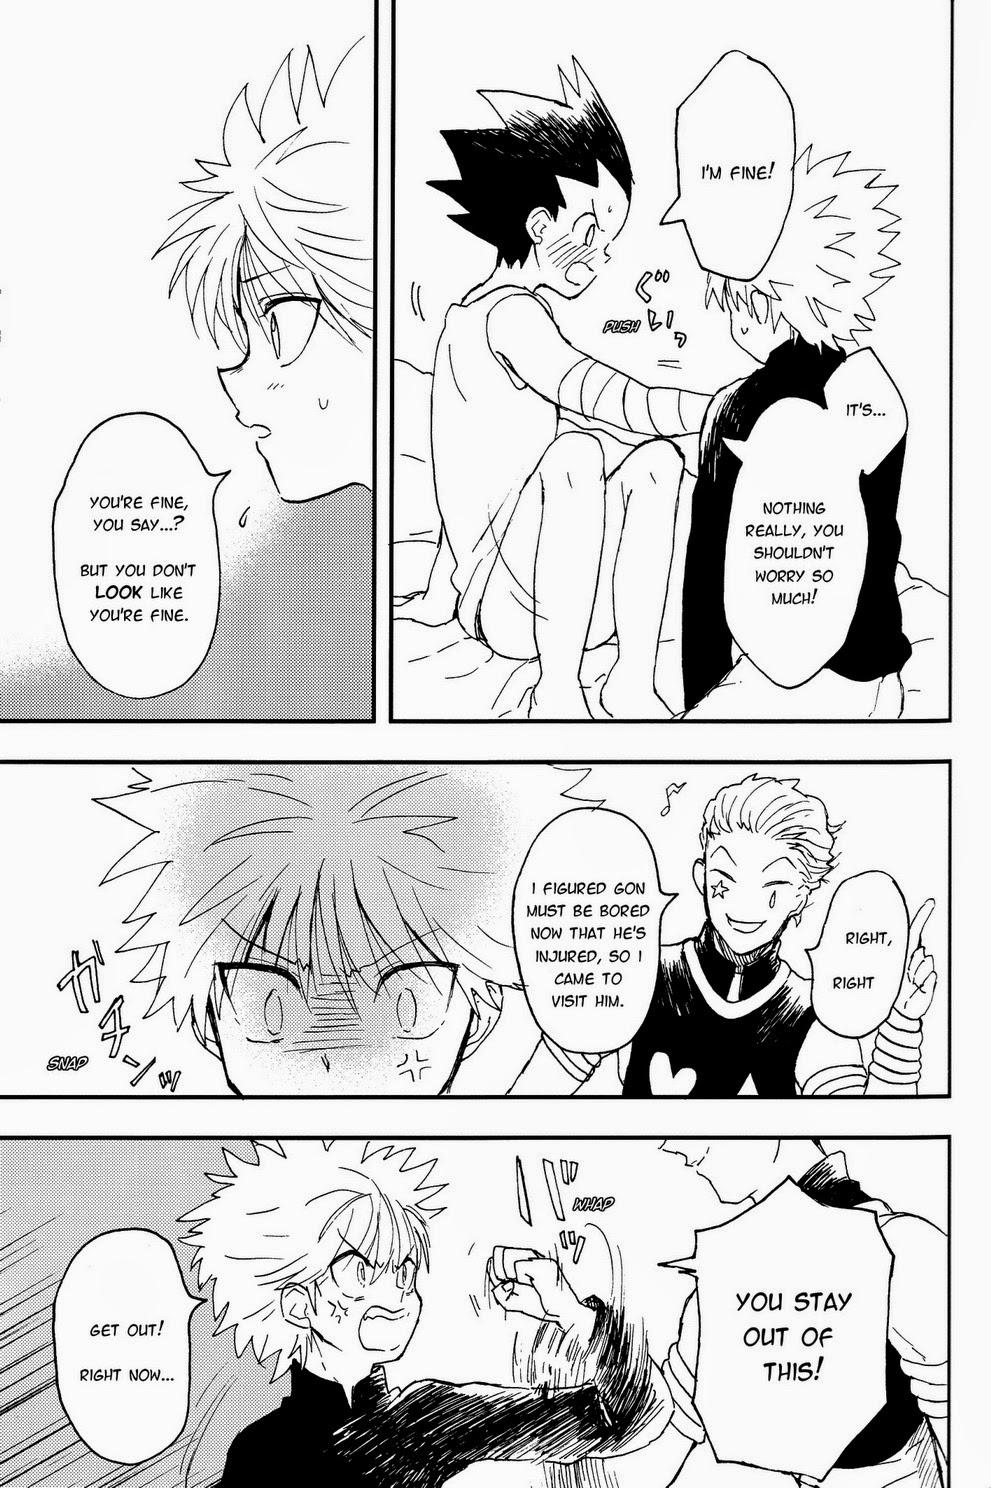 Oil Okosama Lunch - Hunter x hunter Submission - Page 4